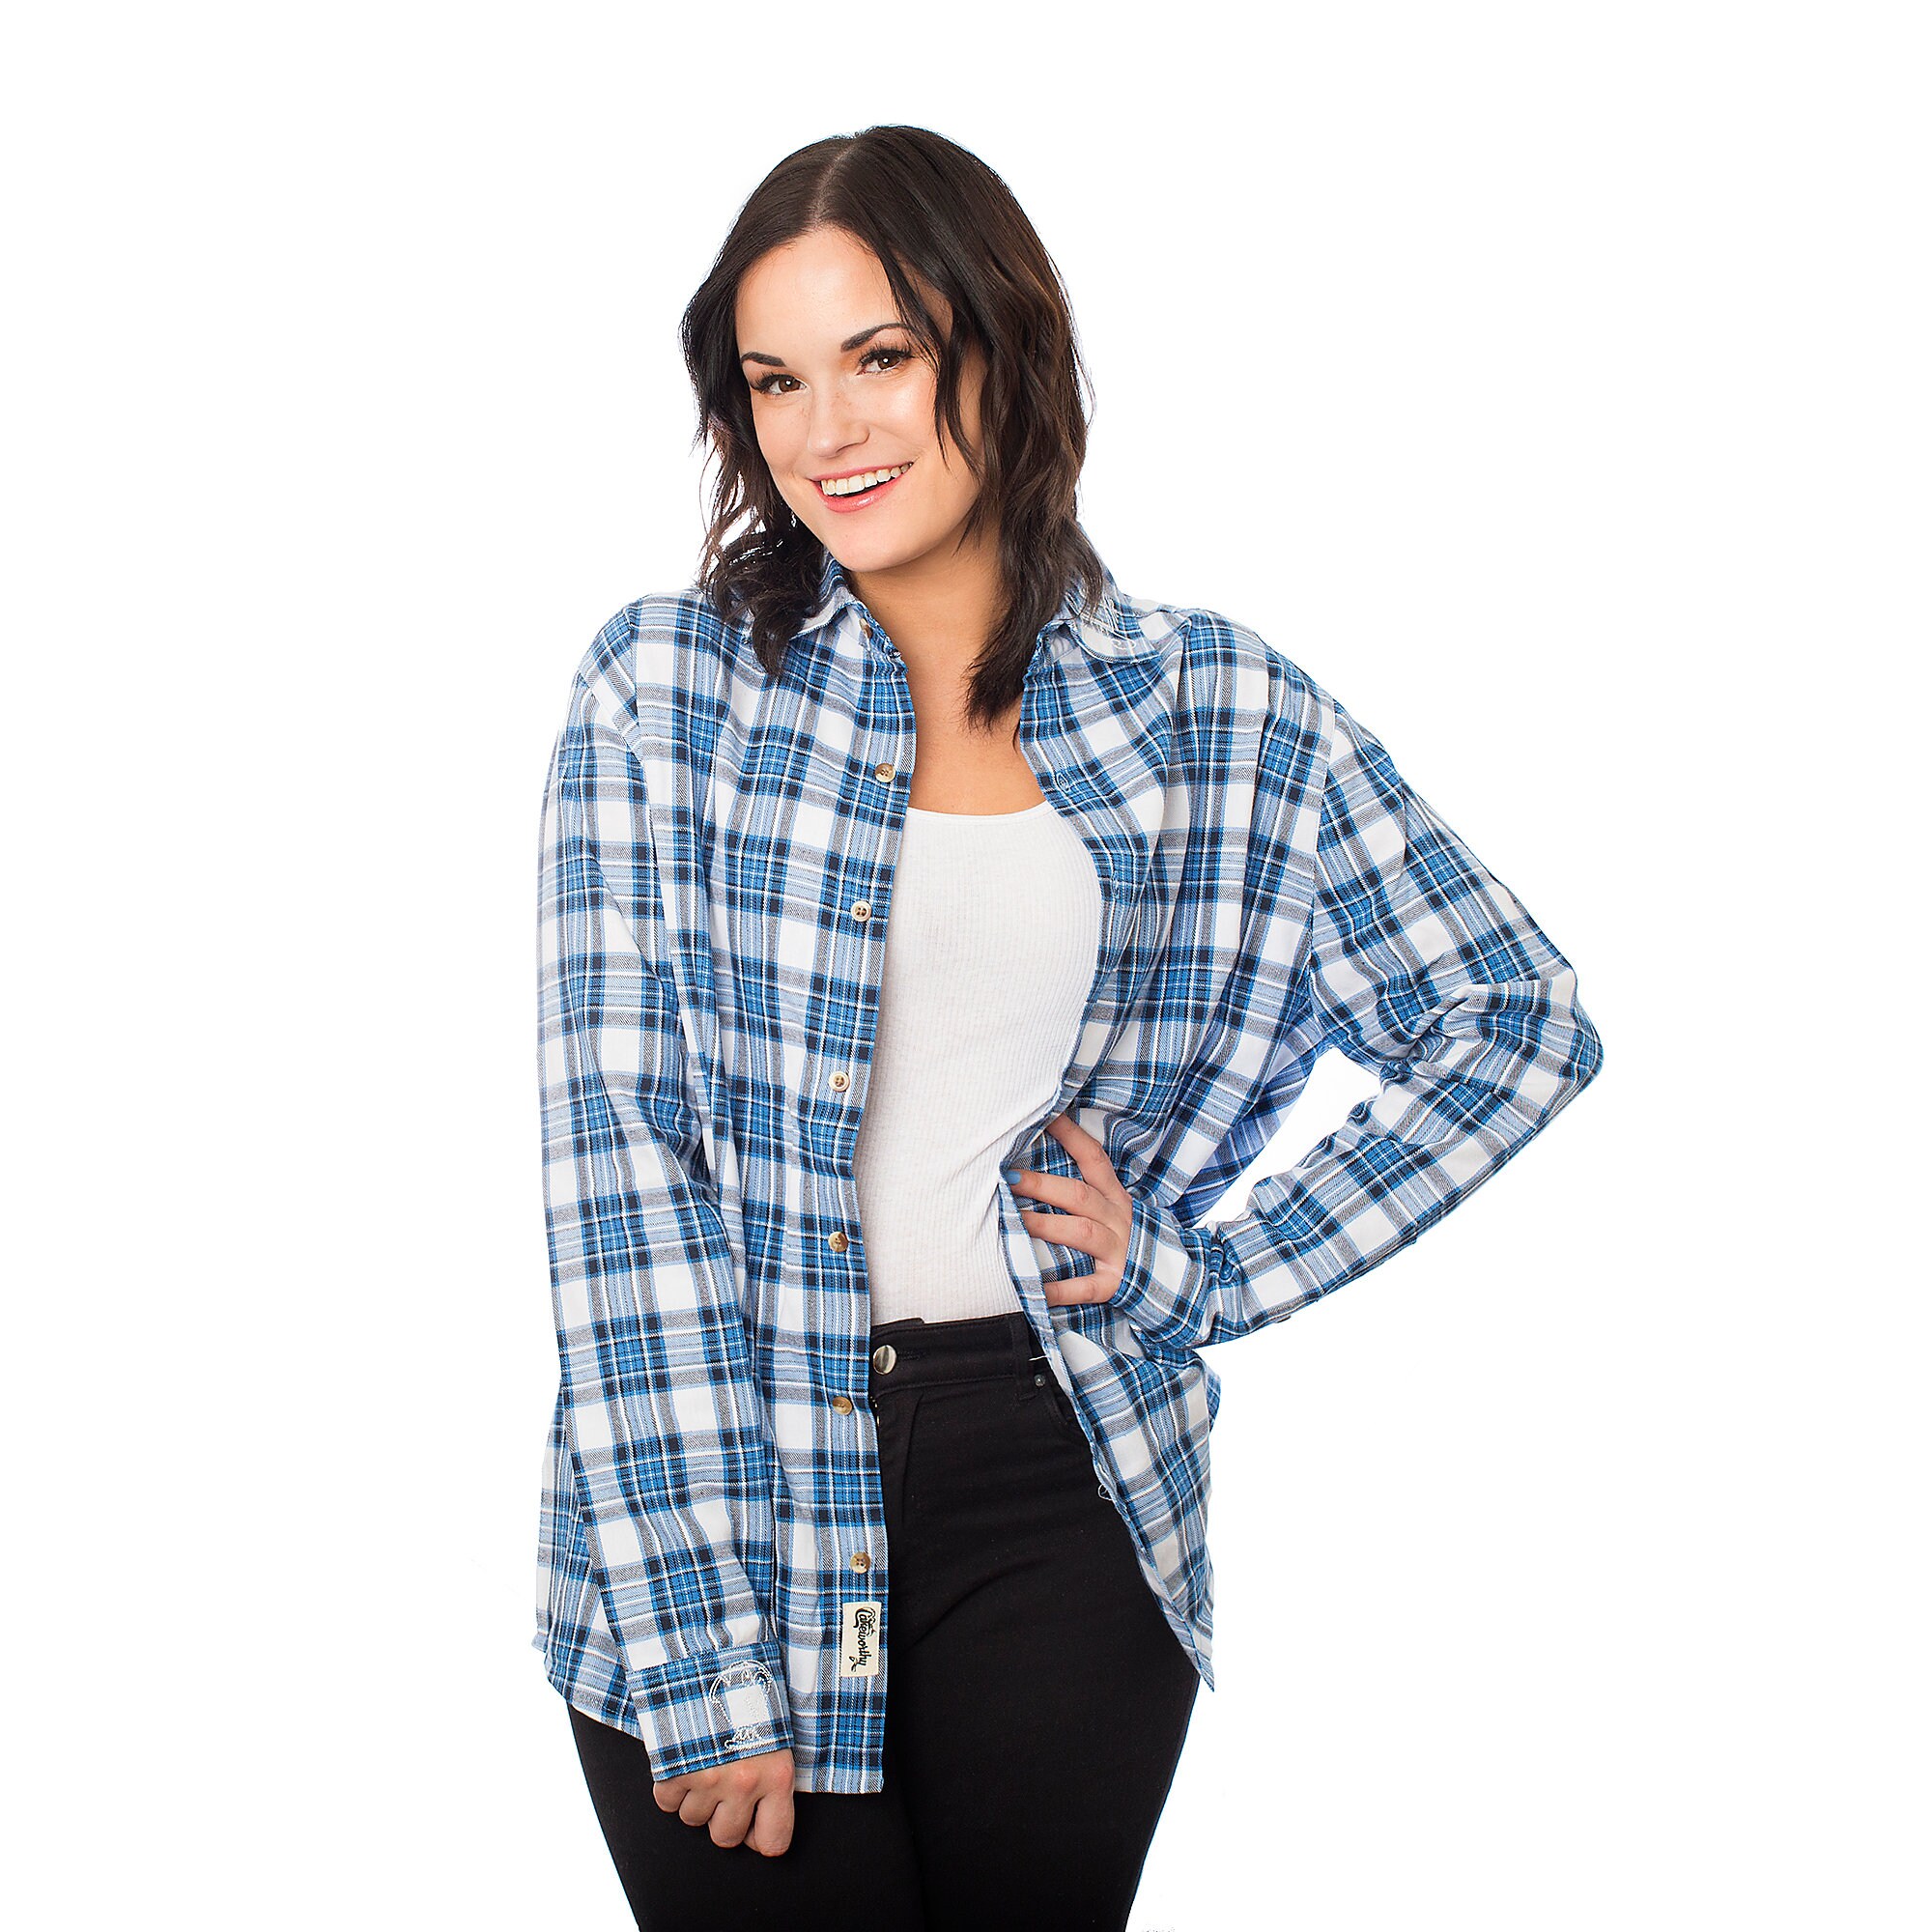 Belle Flannel Shirt for Adults by Cakeworthy